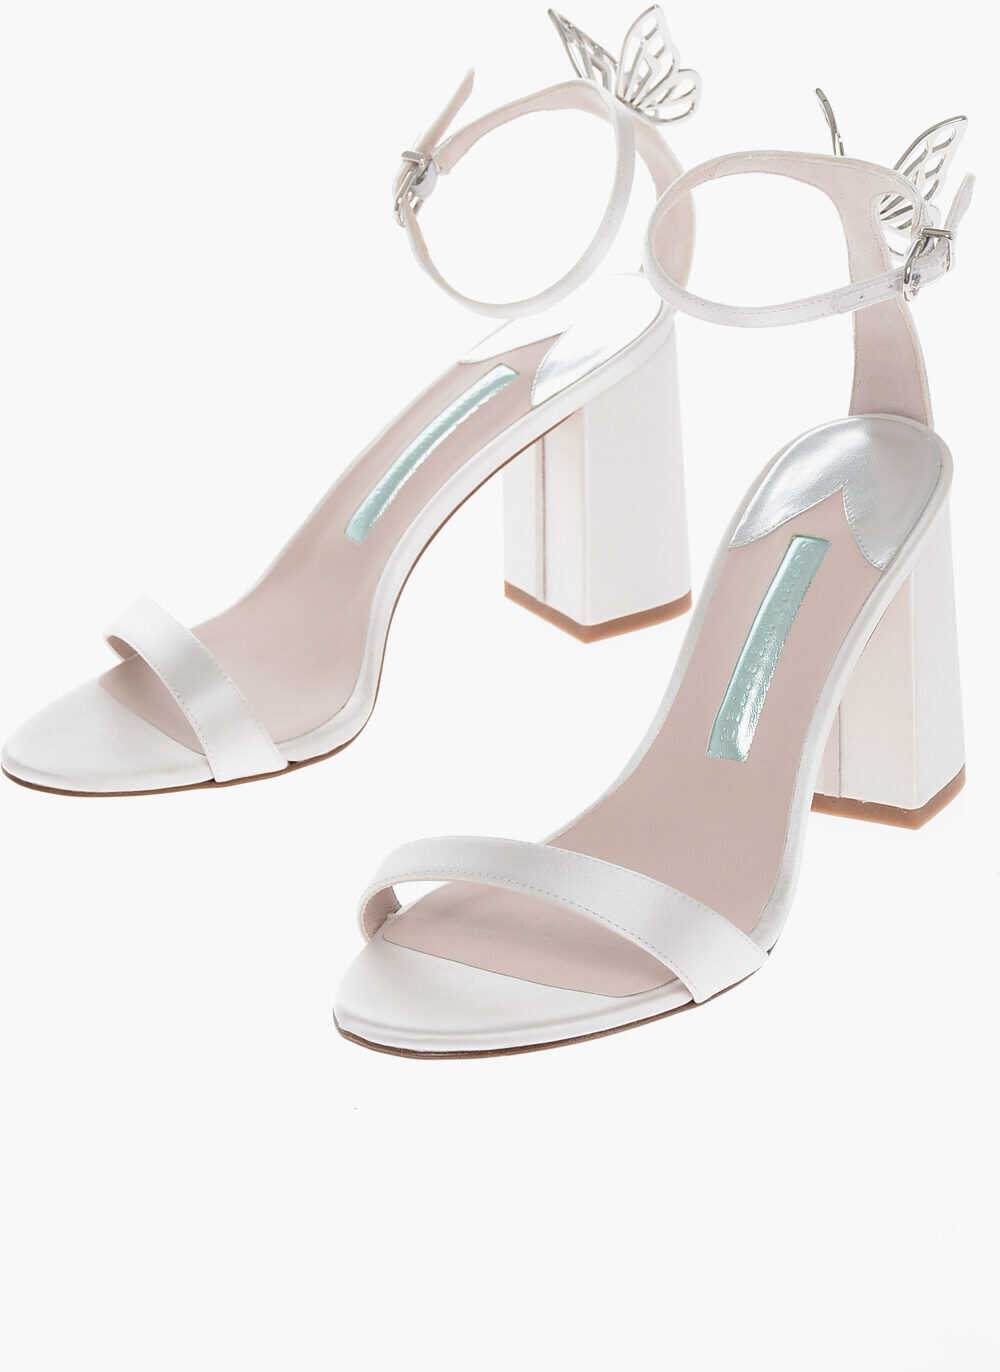 SOPHIA WEBSTER Squared Heel Satin Mariposa Mid Sandals With Butterfly Detai White